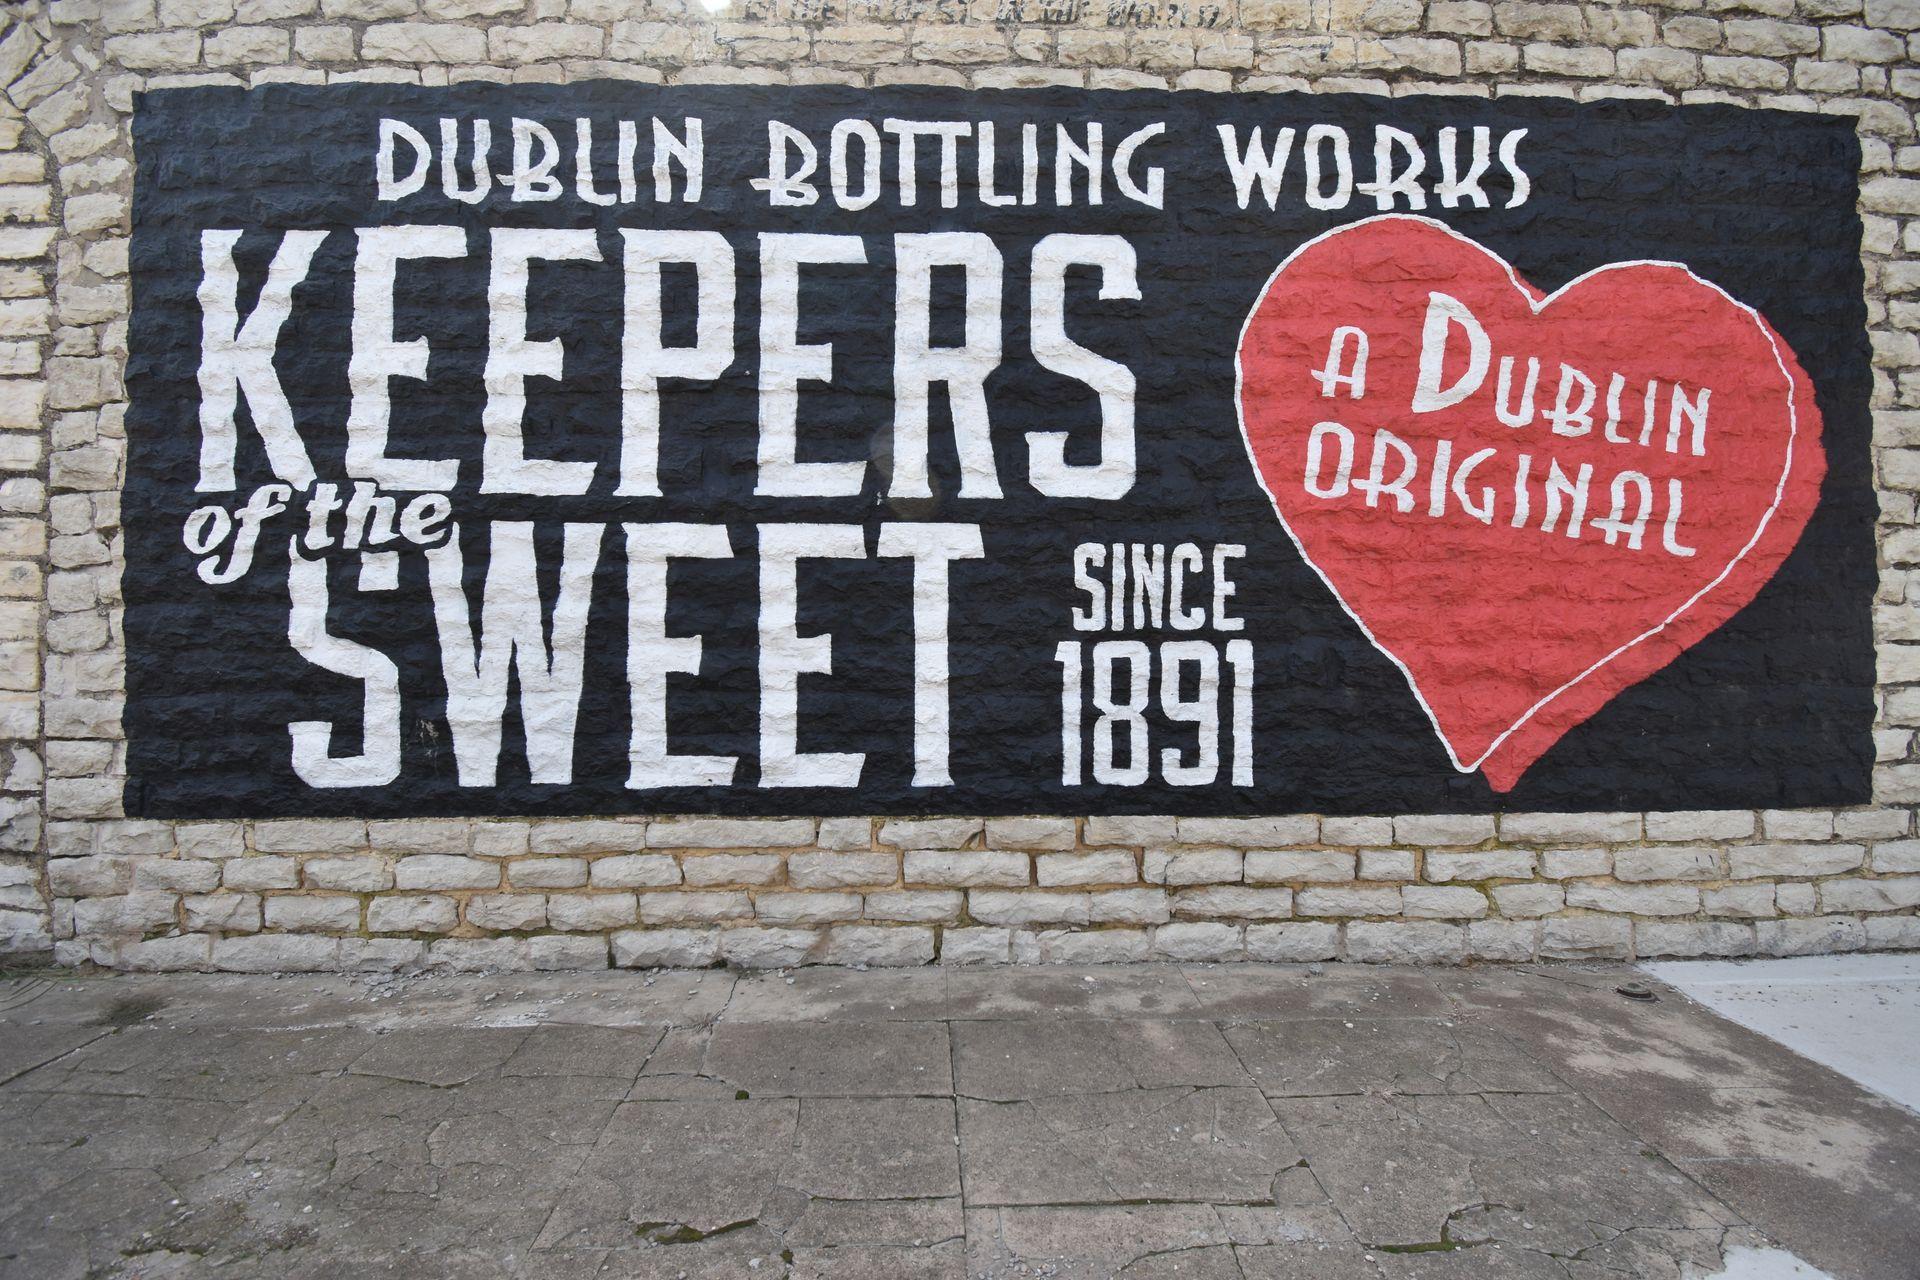 A mural in downtown Dublin that reads "Dublin Bottling Works, Keepers of the Sweet Since 1891, A Dublin Original"